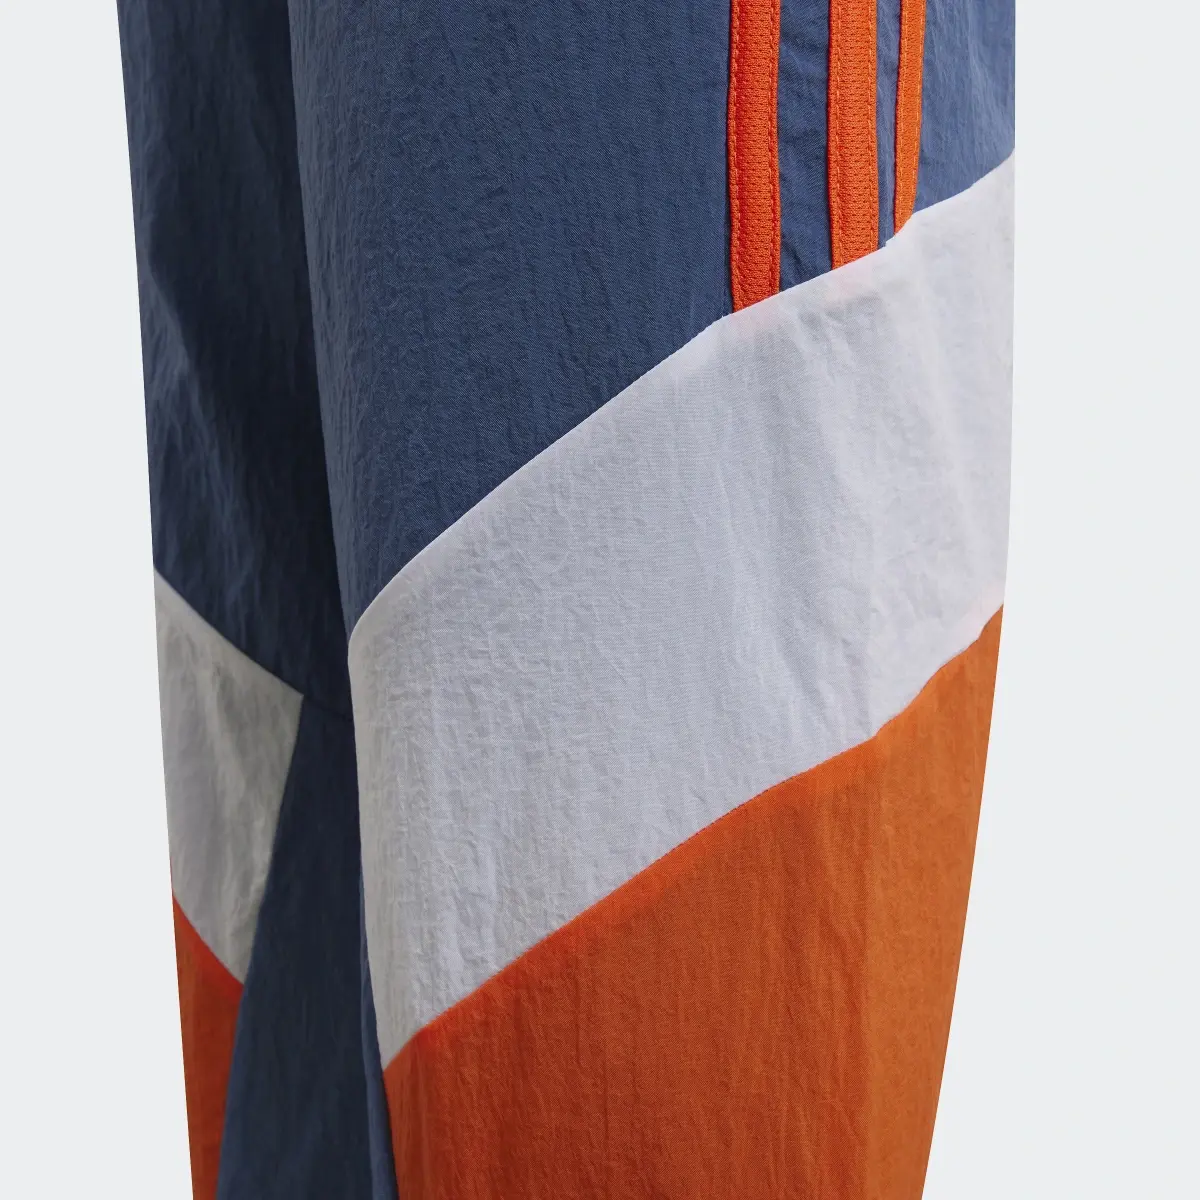 Adidas Colorblock Woven Tracksuit Bottoms. 3